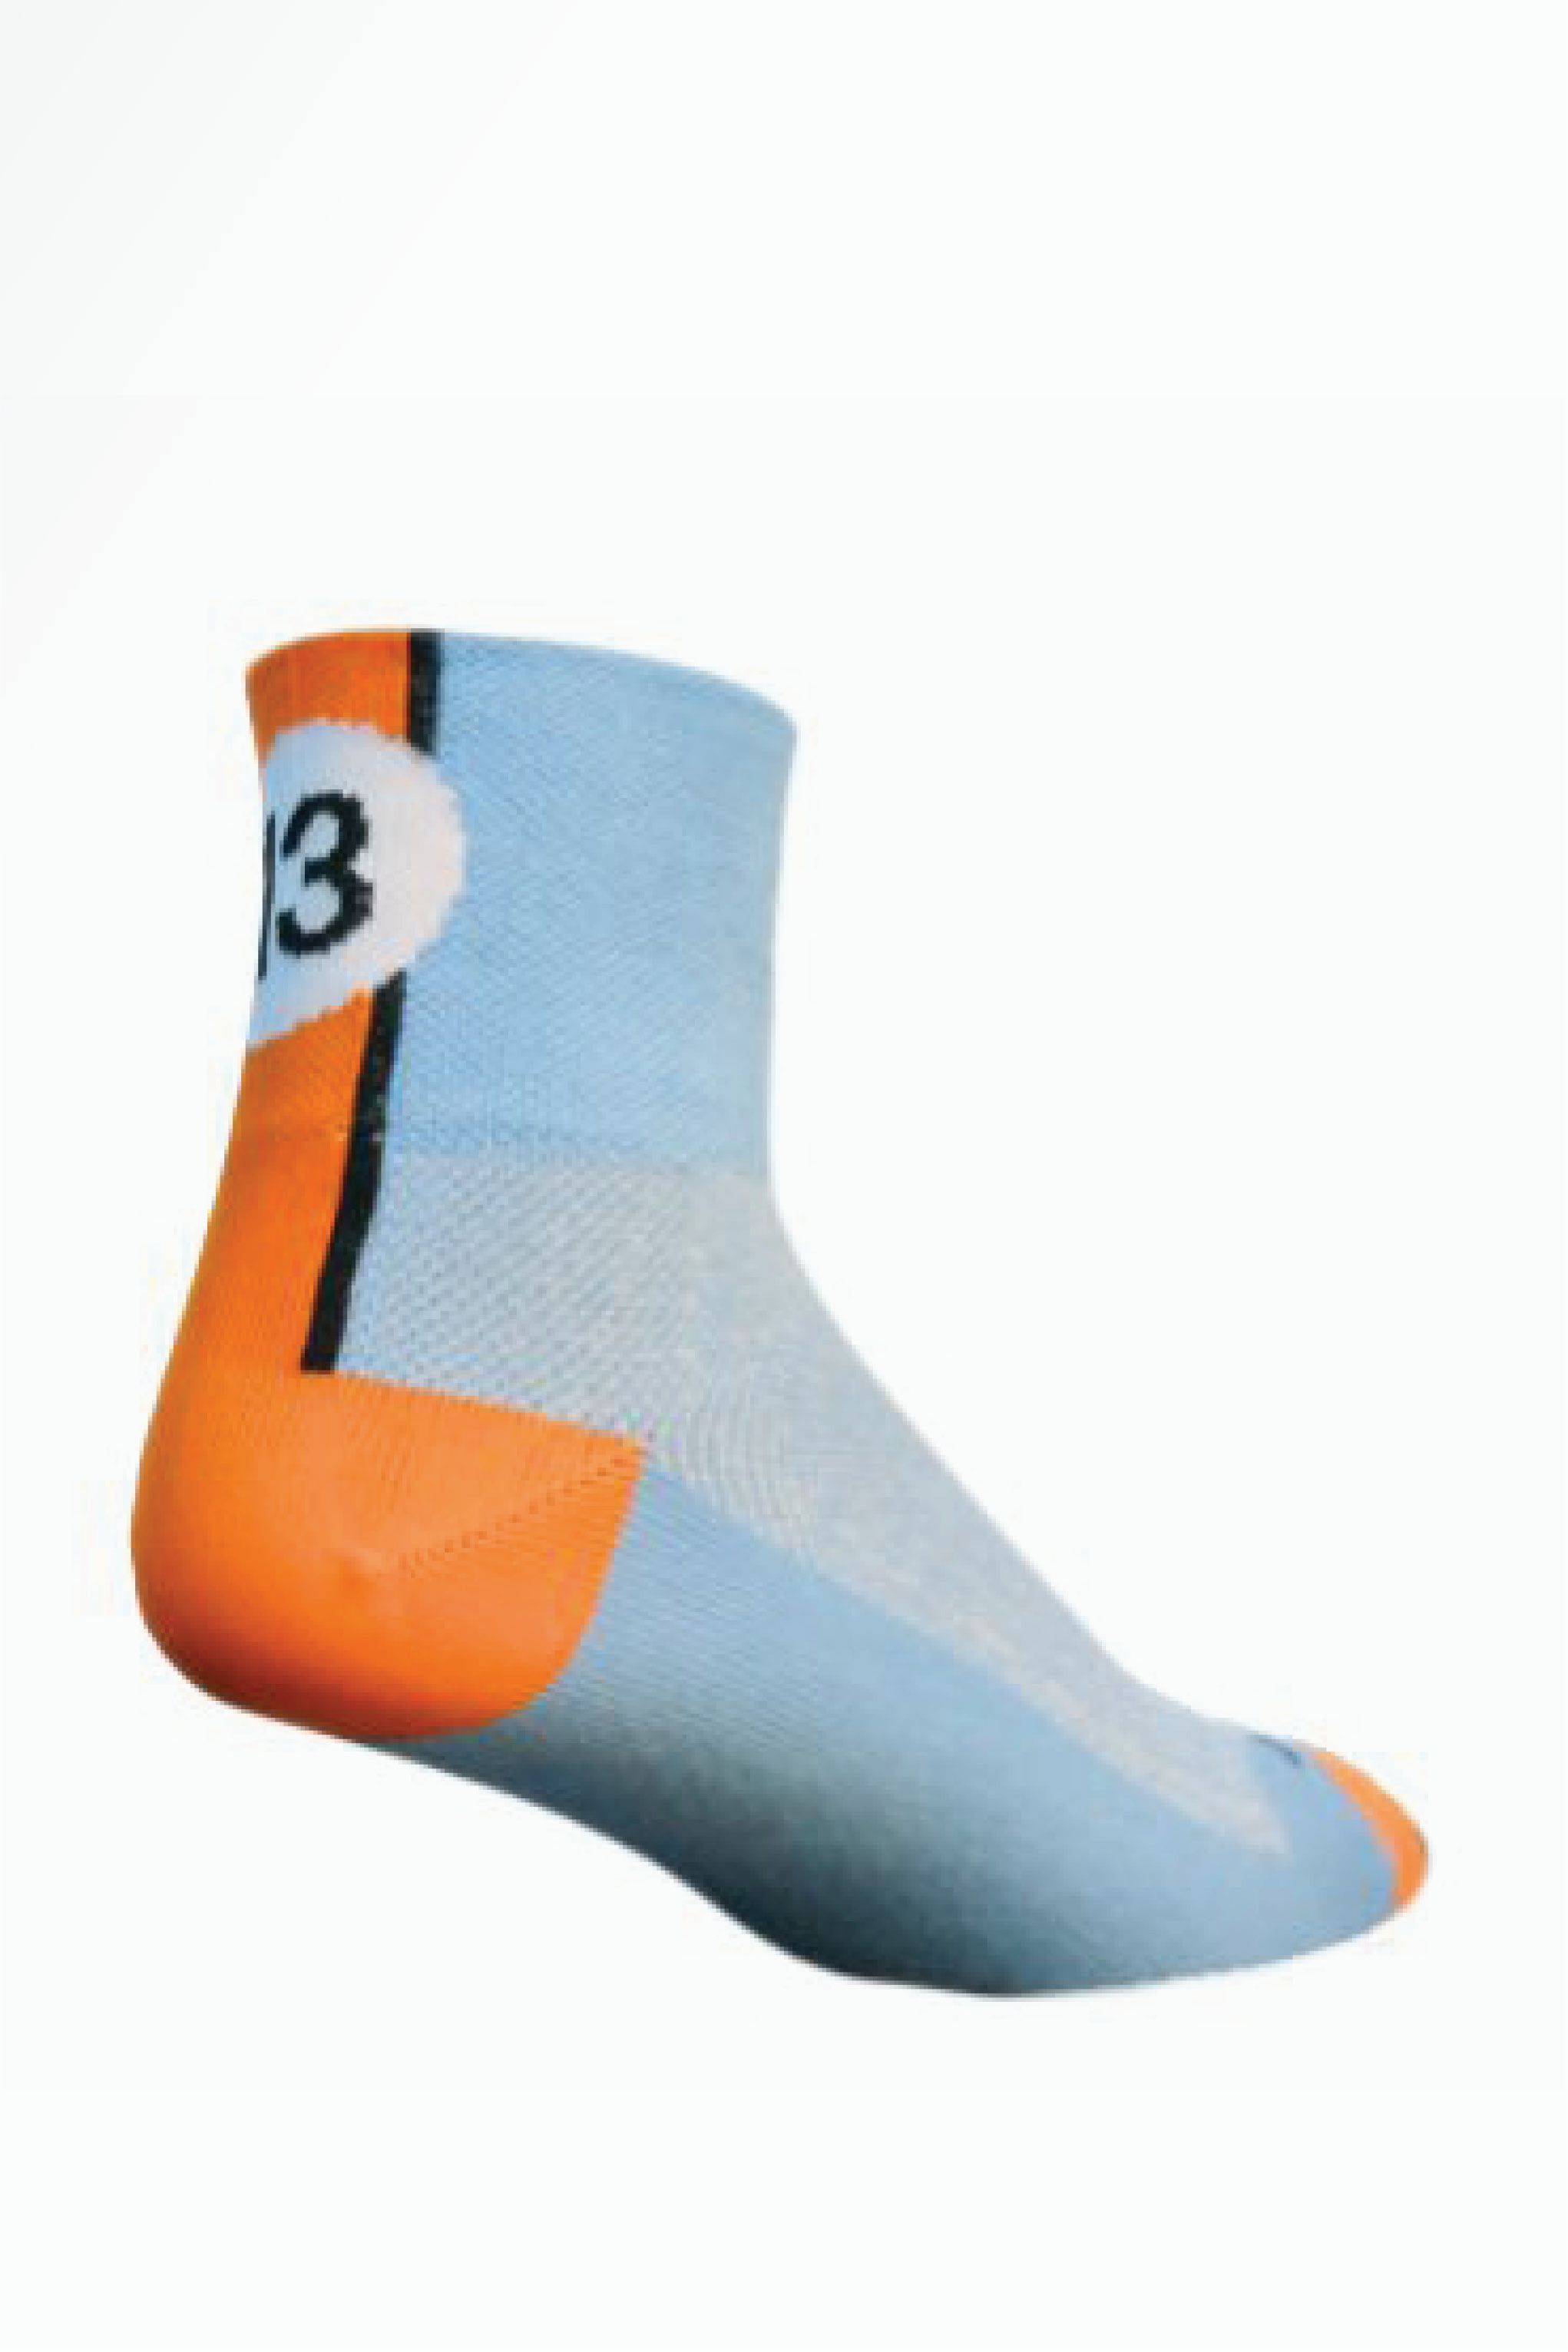 Details about   Pro Mens Womens XC Cycling Socks Riding Ankle Sports Socks Bicycle Socks Green 